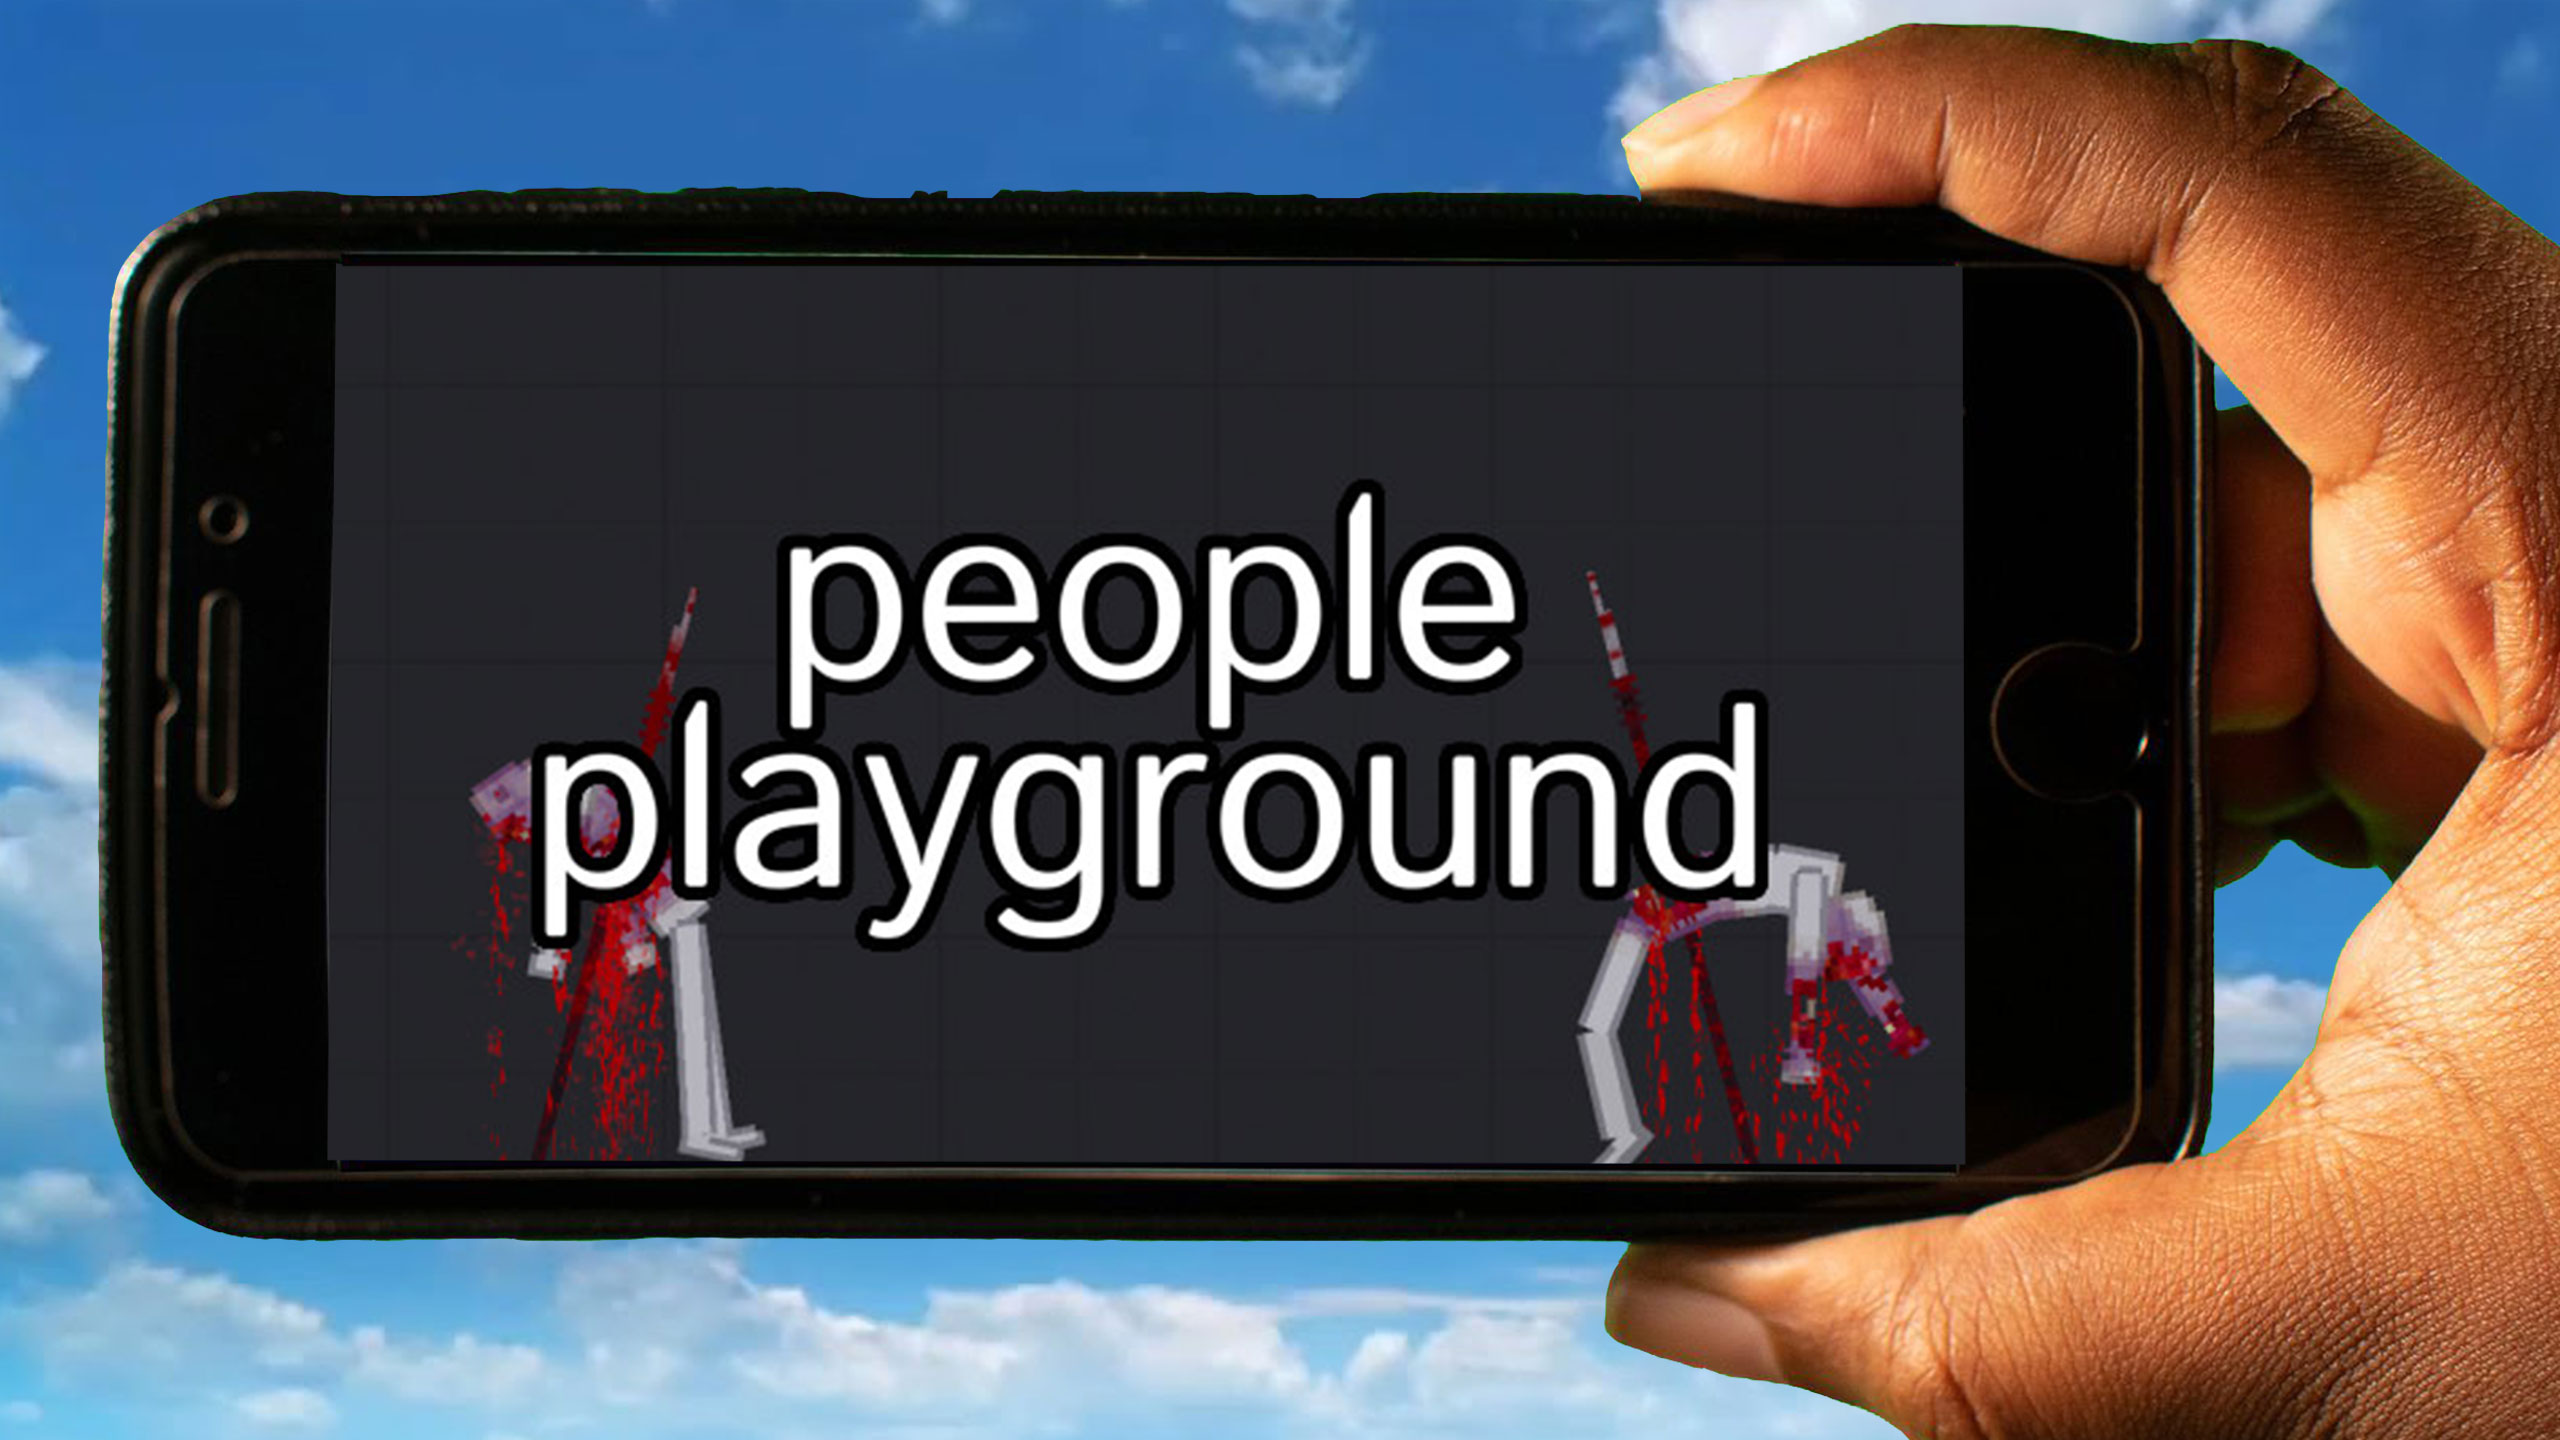 PEOPLE PLAYGROUND iOS iPhone Mobile MacOS Version Full Game Setup